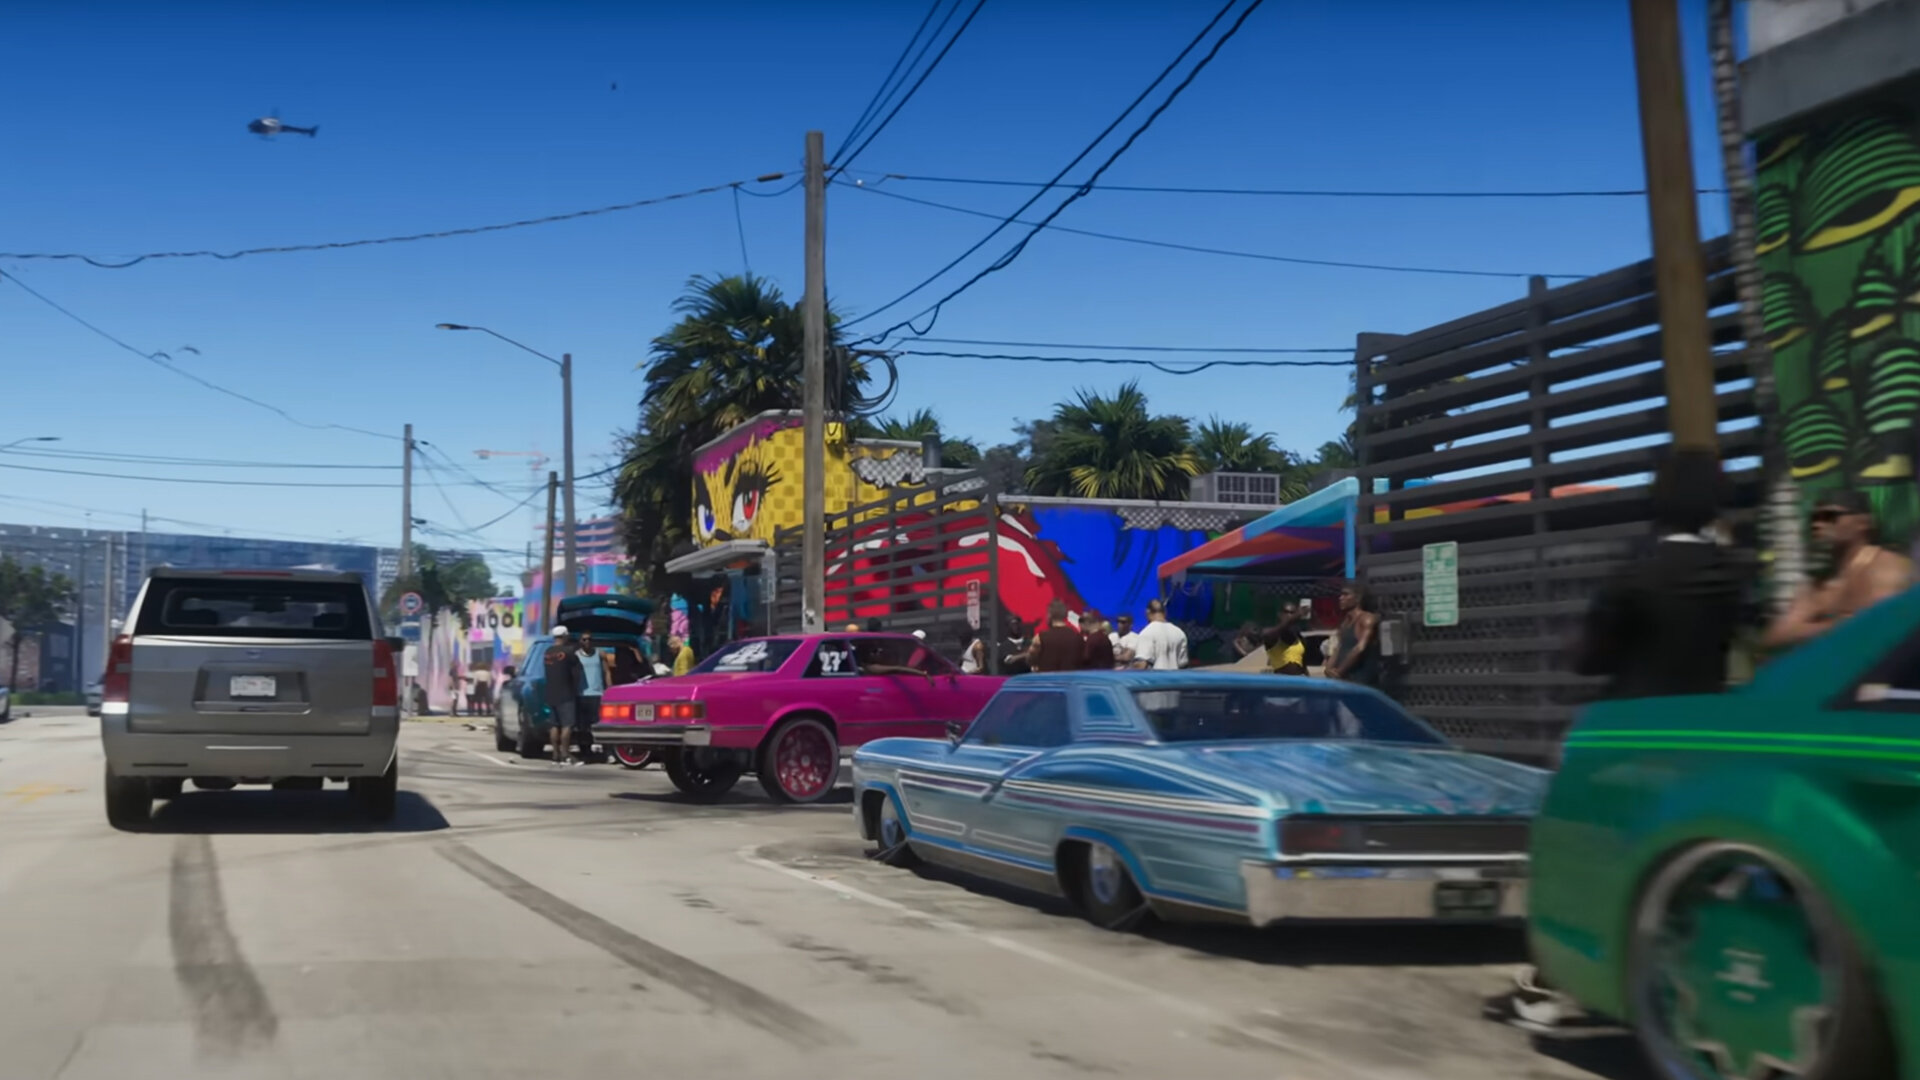 More information about "What We Learned From the GTA 6 Leaked Footage"